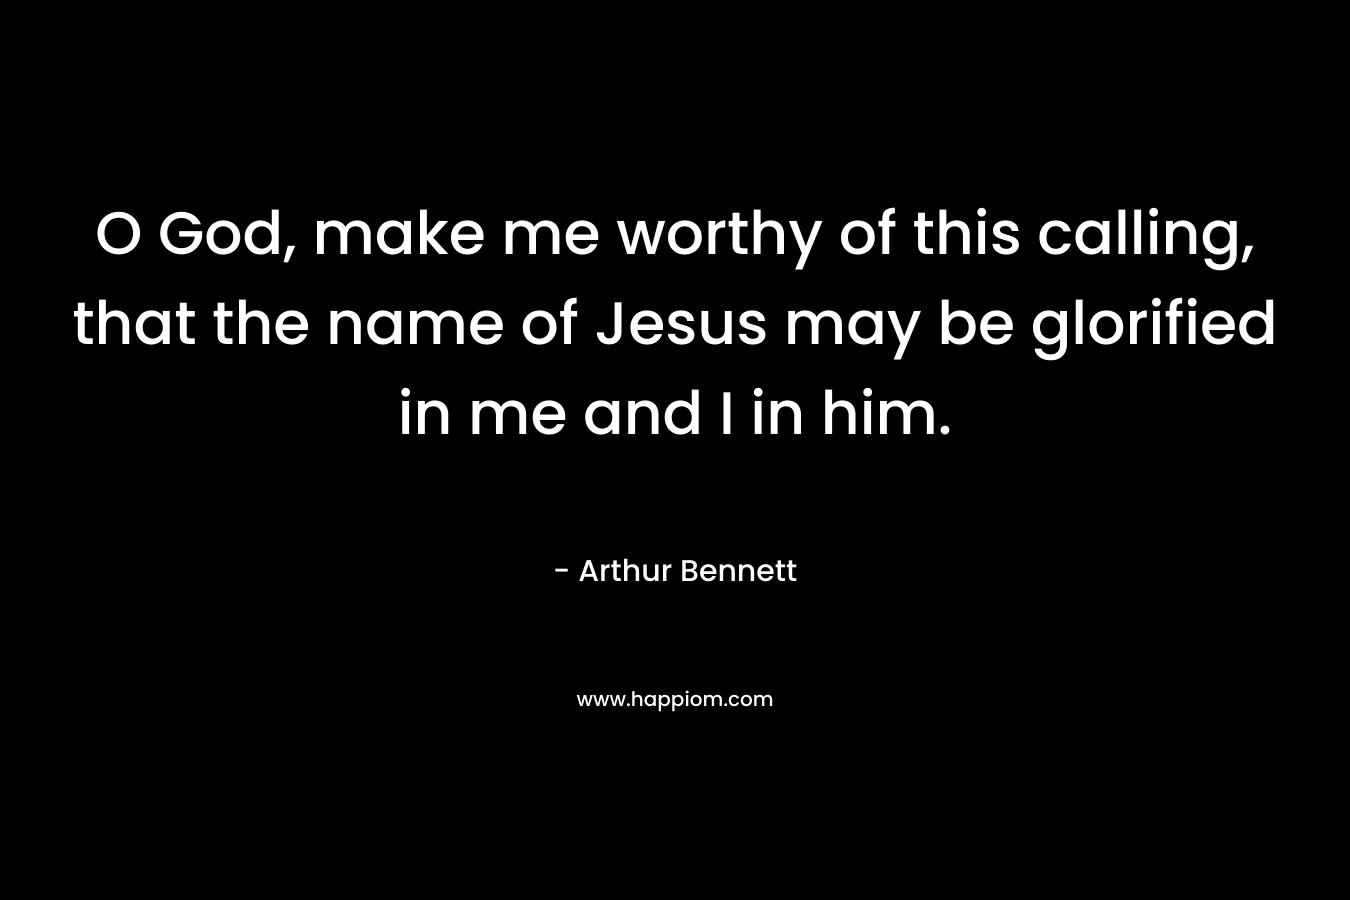 O God, make me worthy of this calling, that the name of Jesus may be glorified in me and I in him. – Arthur Bennett